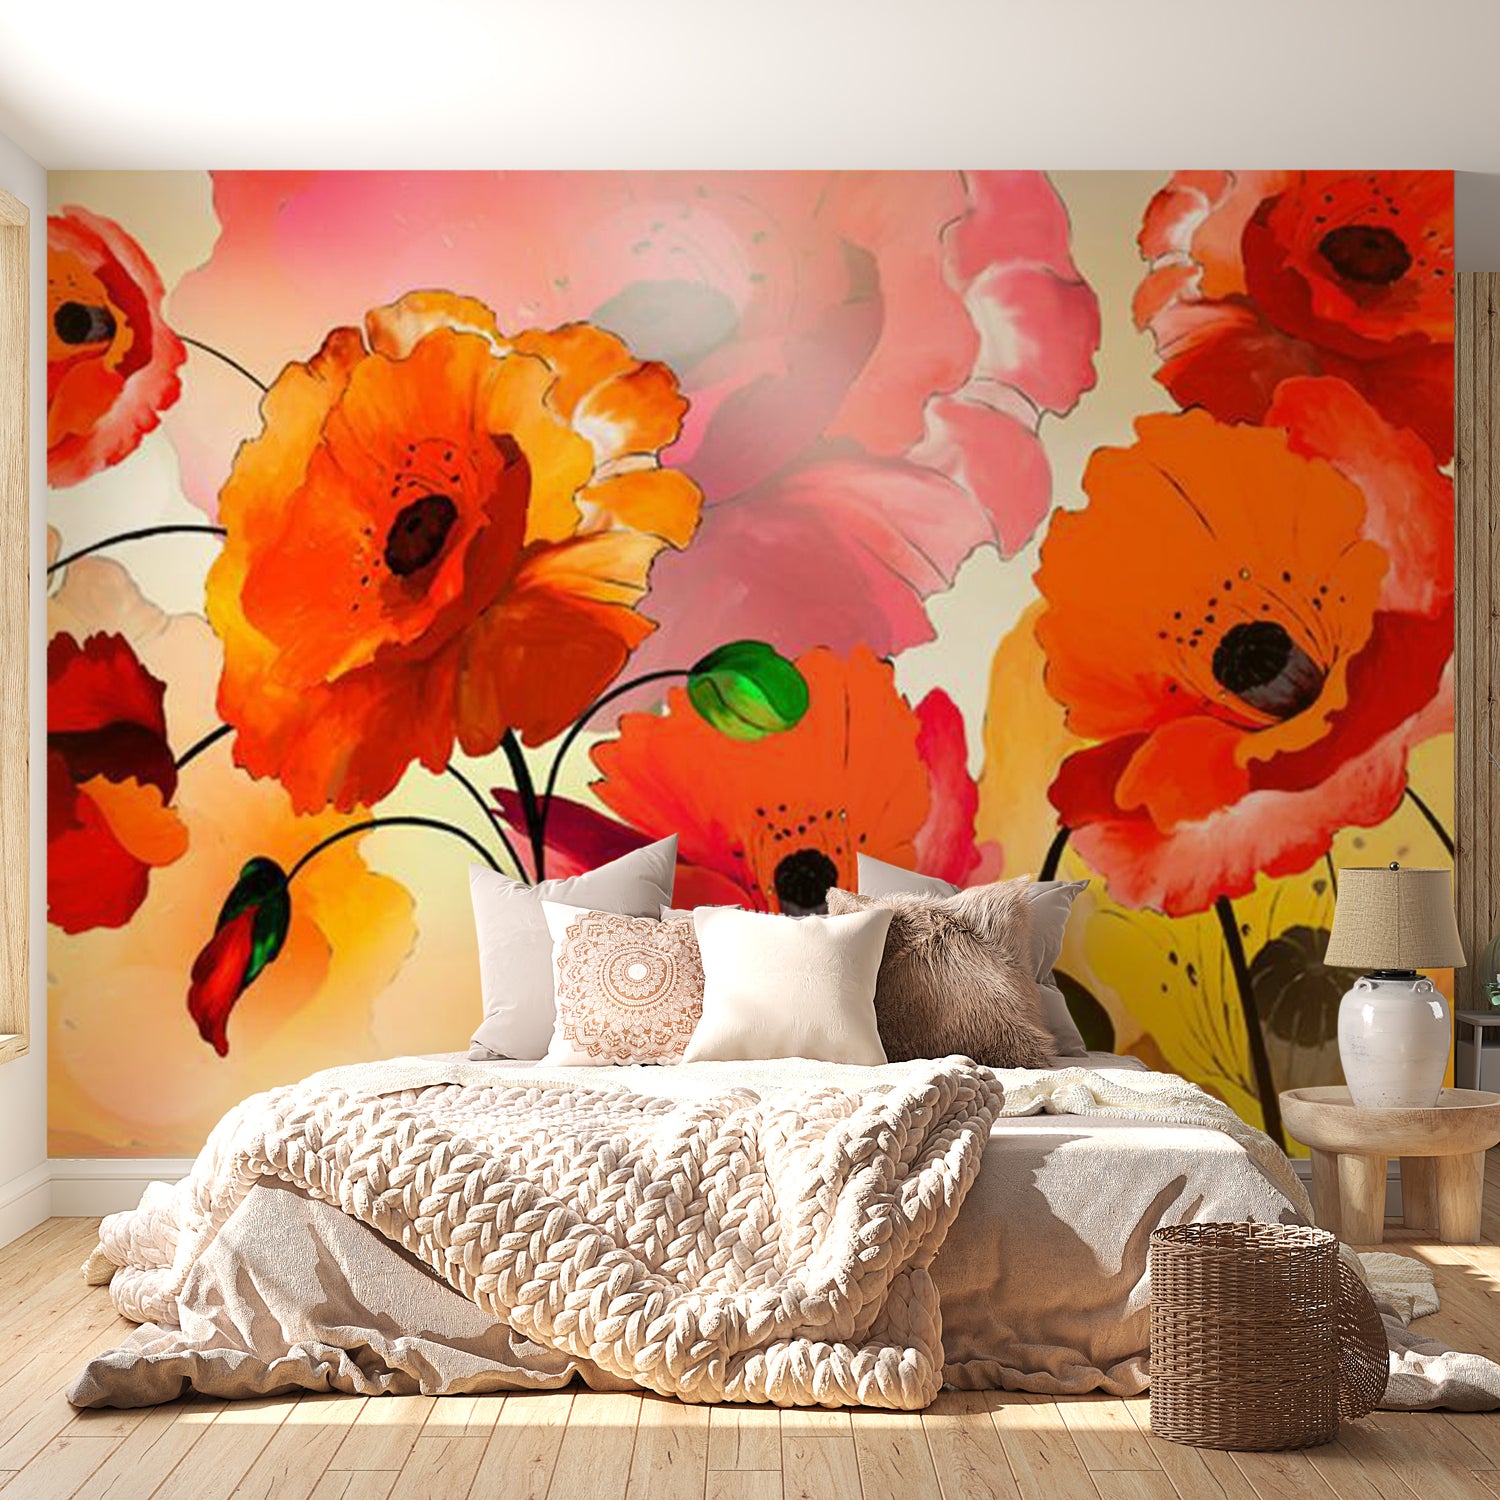 Peel & Stick Floral XXL Wall Mural - Velvet Red Poppies - Removable Wall Decals